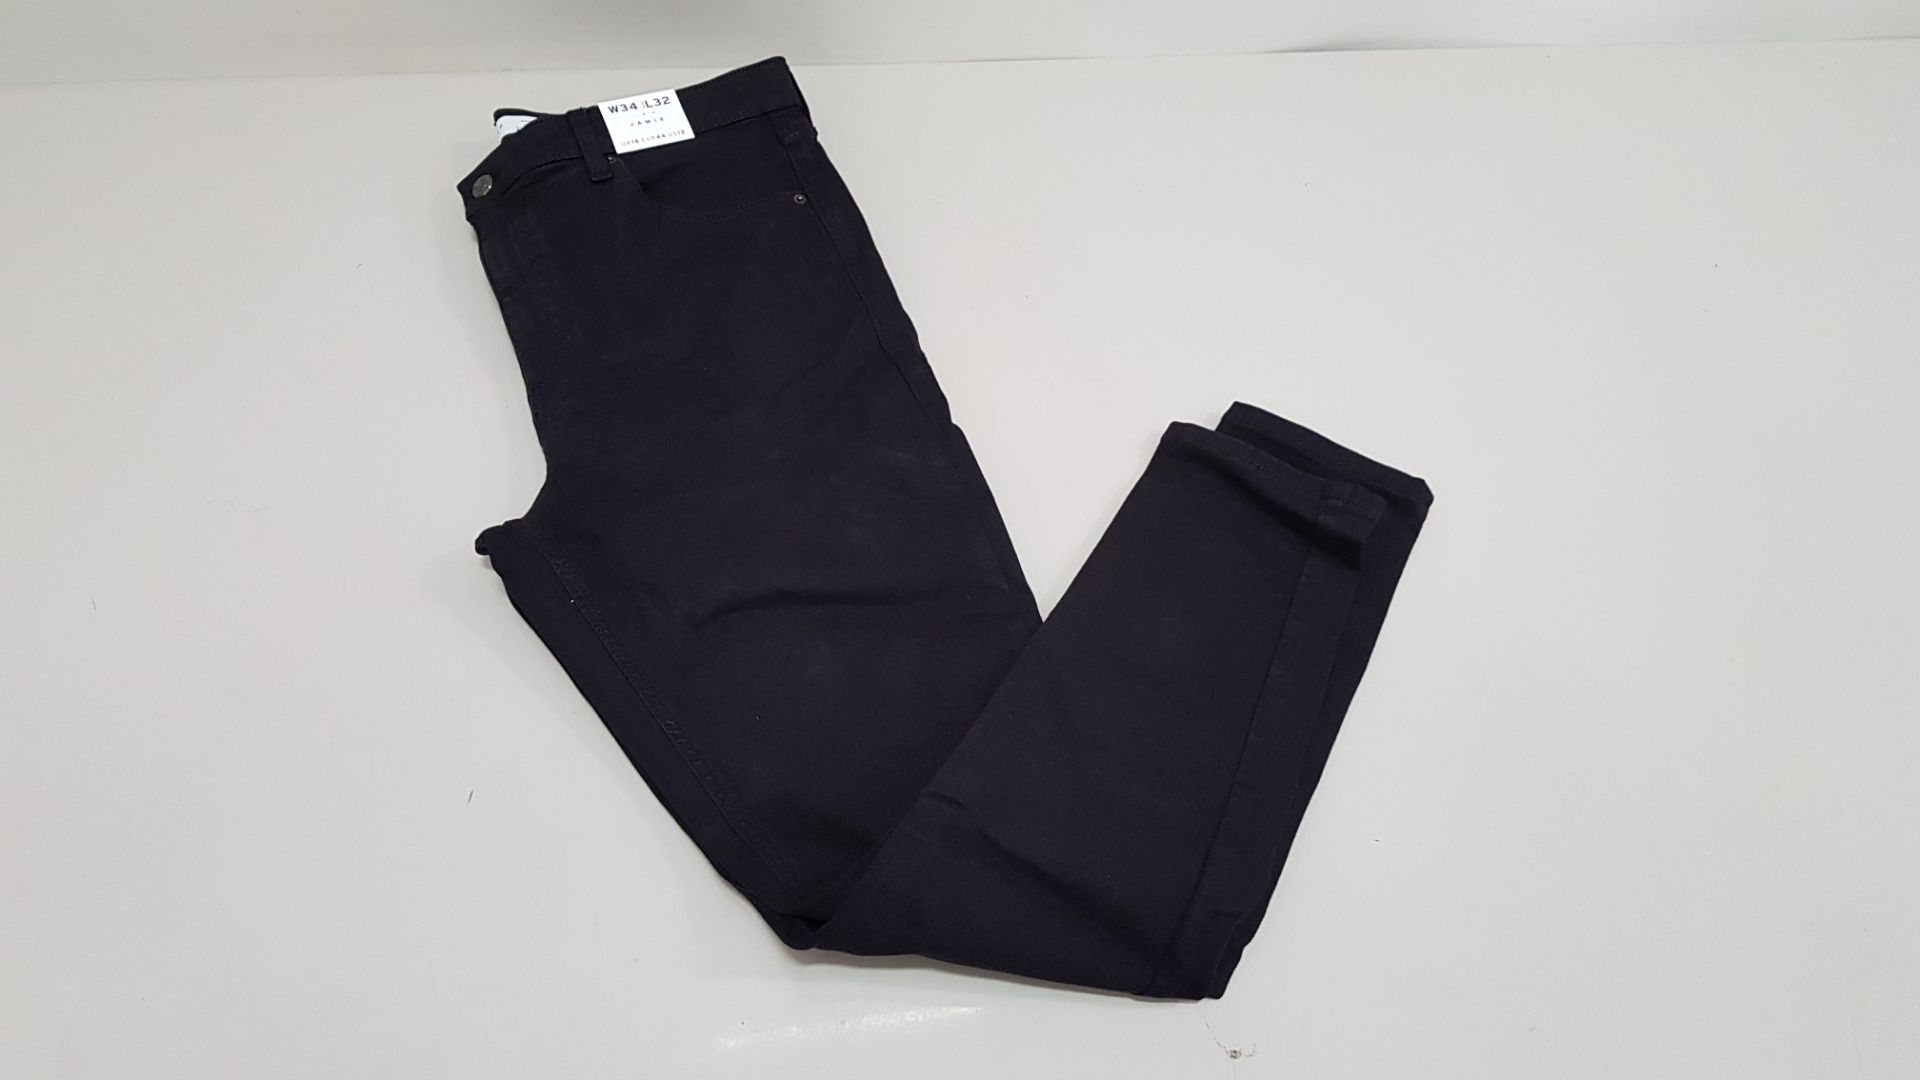 11 X BRAND NEW TOPSHOP JAMIE HIGH WAISTED SKINNY JEANS UK SIZE 16 RRP £40.00 (TOTAL RRP £440.00)